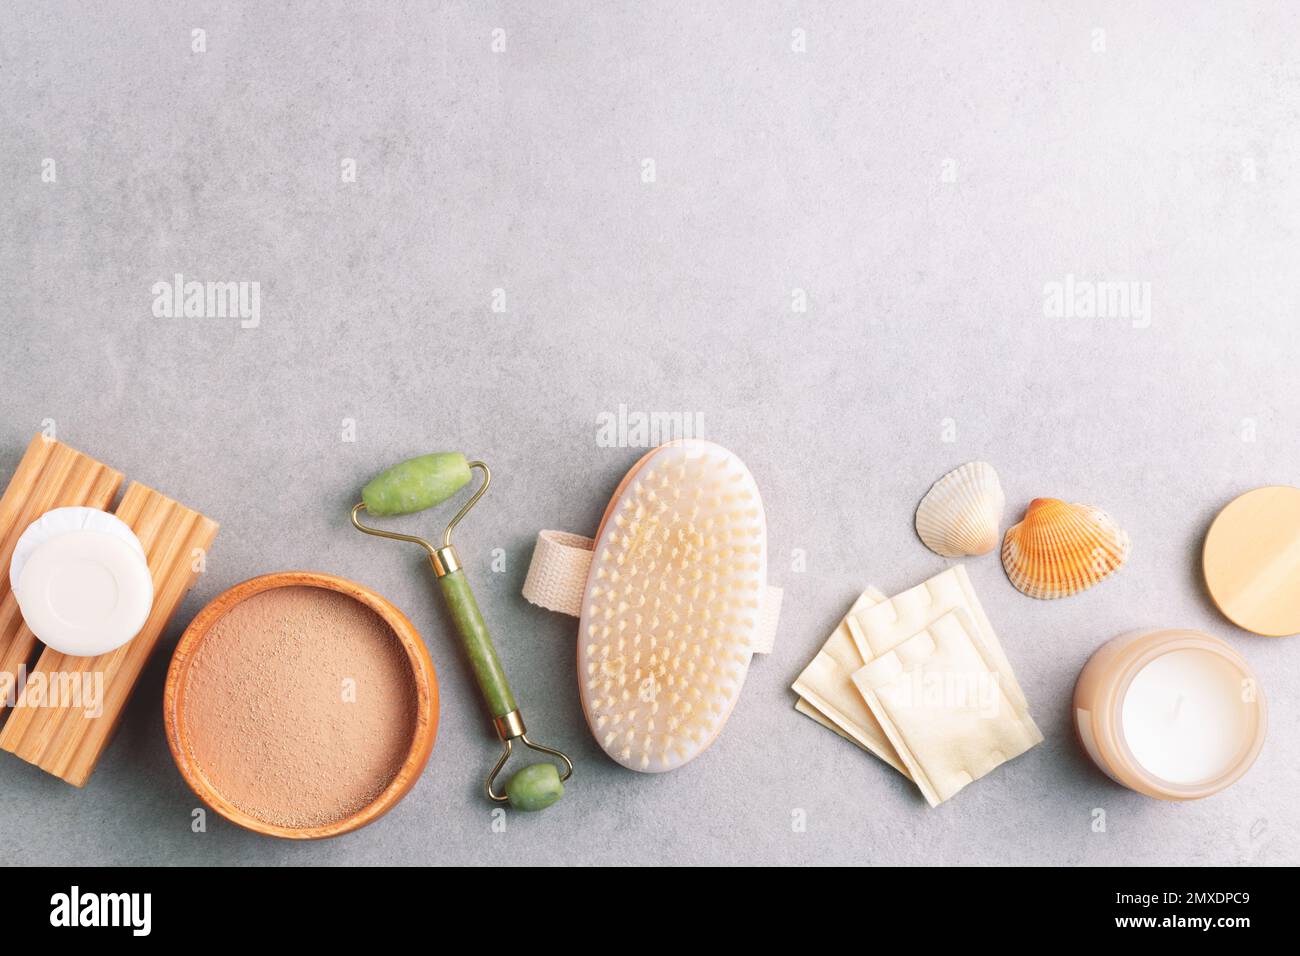 Set of skin care and wellness products. Massage brush, jade roller, cotton pads, soap, facial clay mask on grey stone background. Stock Photo